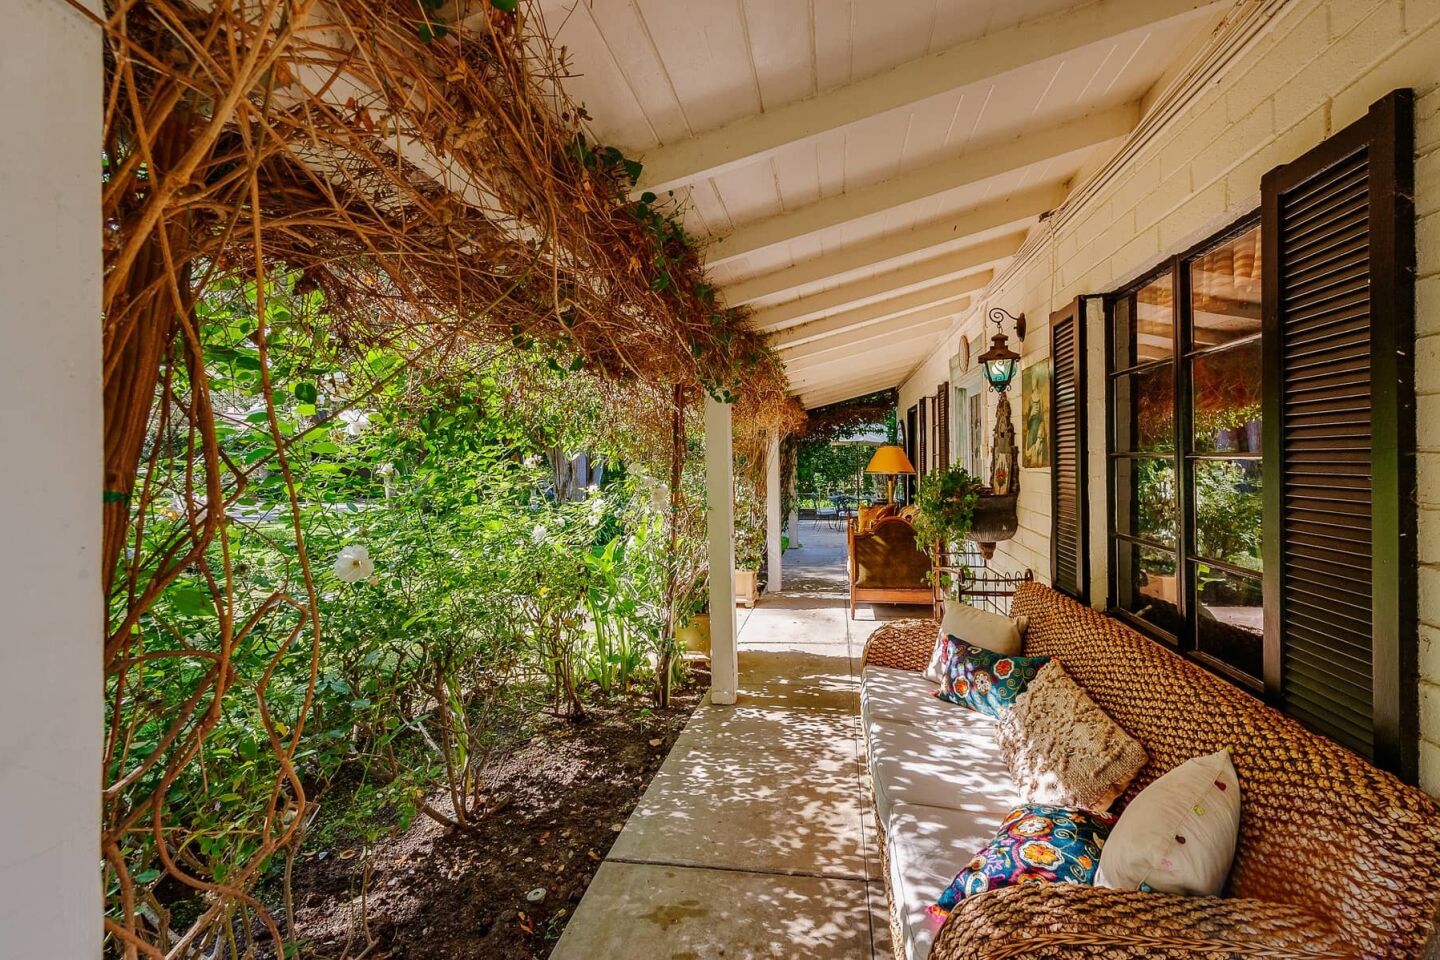 Drew Barrymore and Tom Green's onetime home | Hot Property